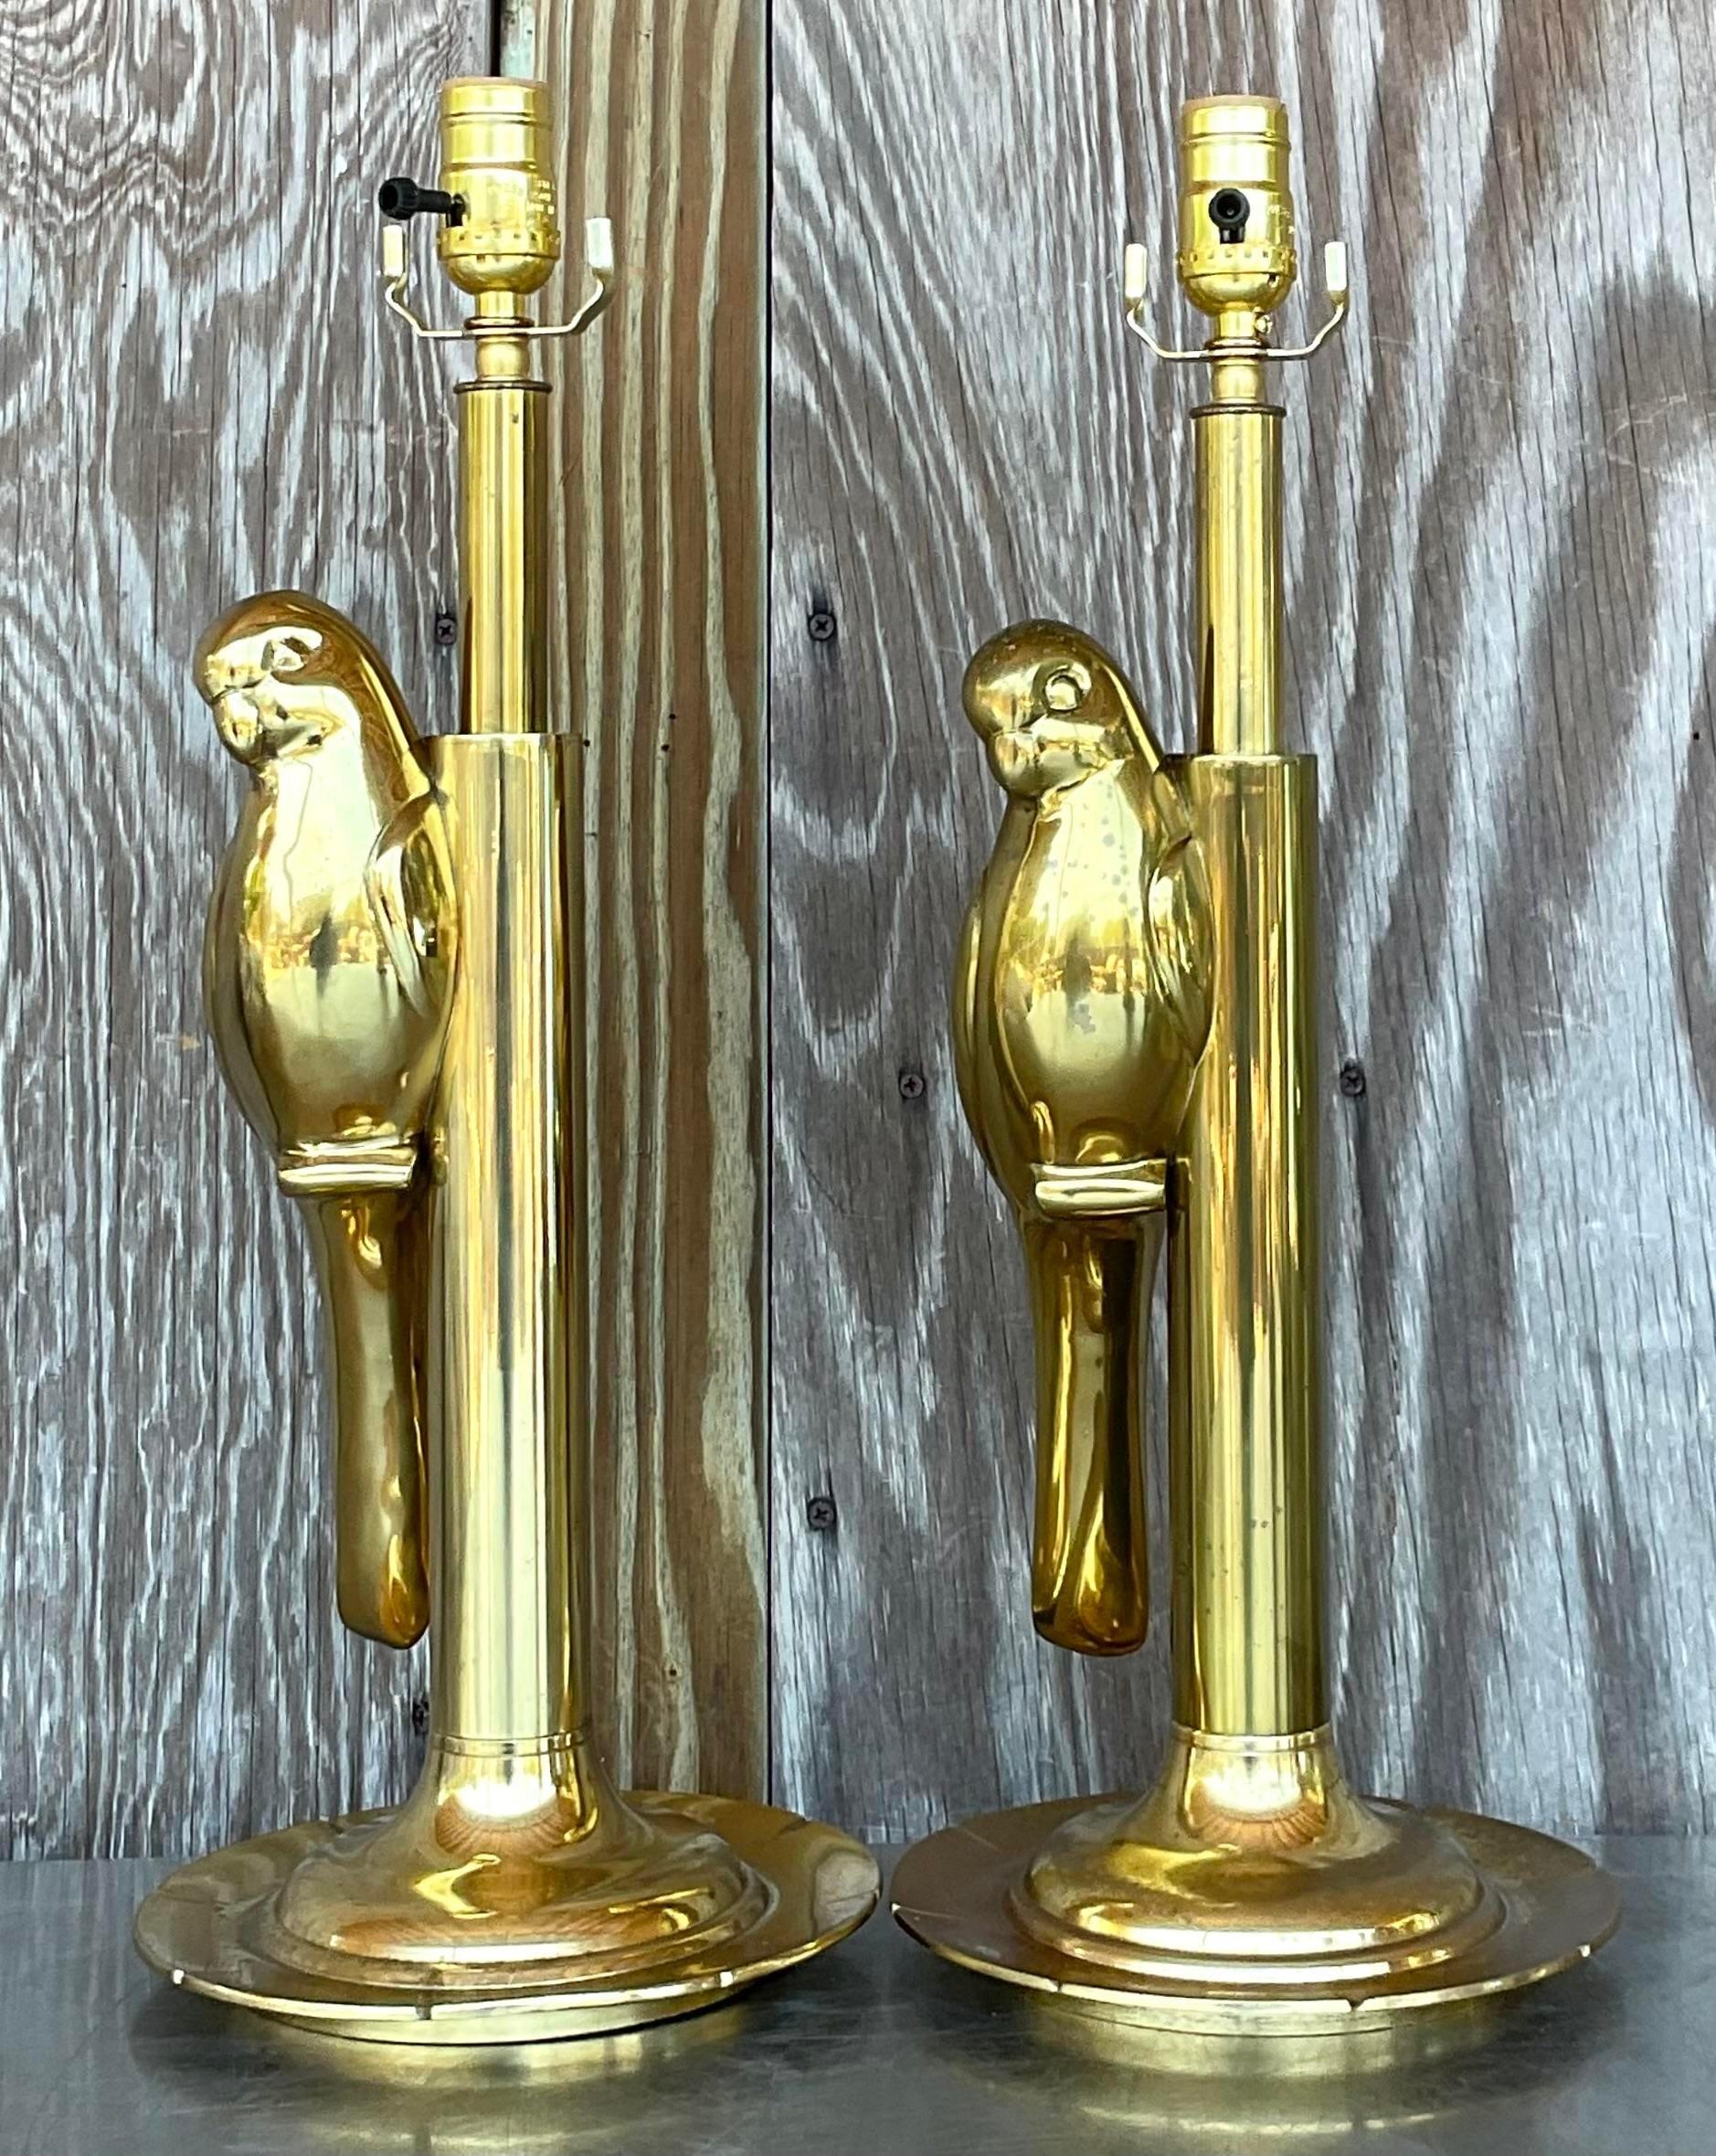 Vintage Boho Polished Brass Parrot Lamps - a Pair In Good Condition For Sale In west palm beach, FL